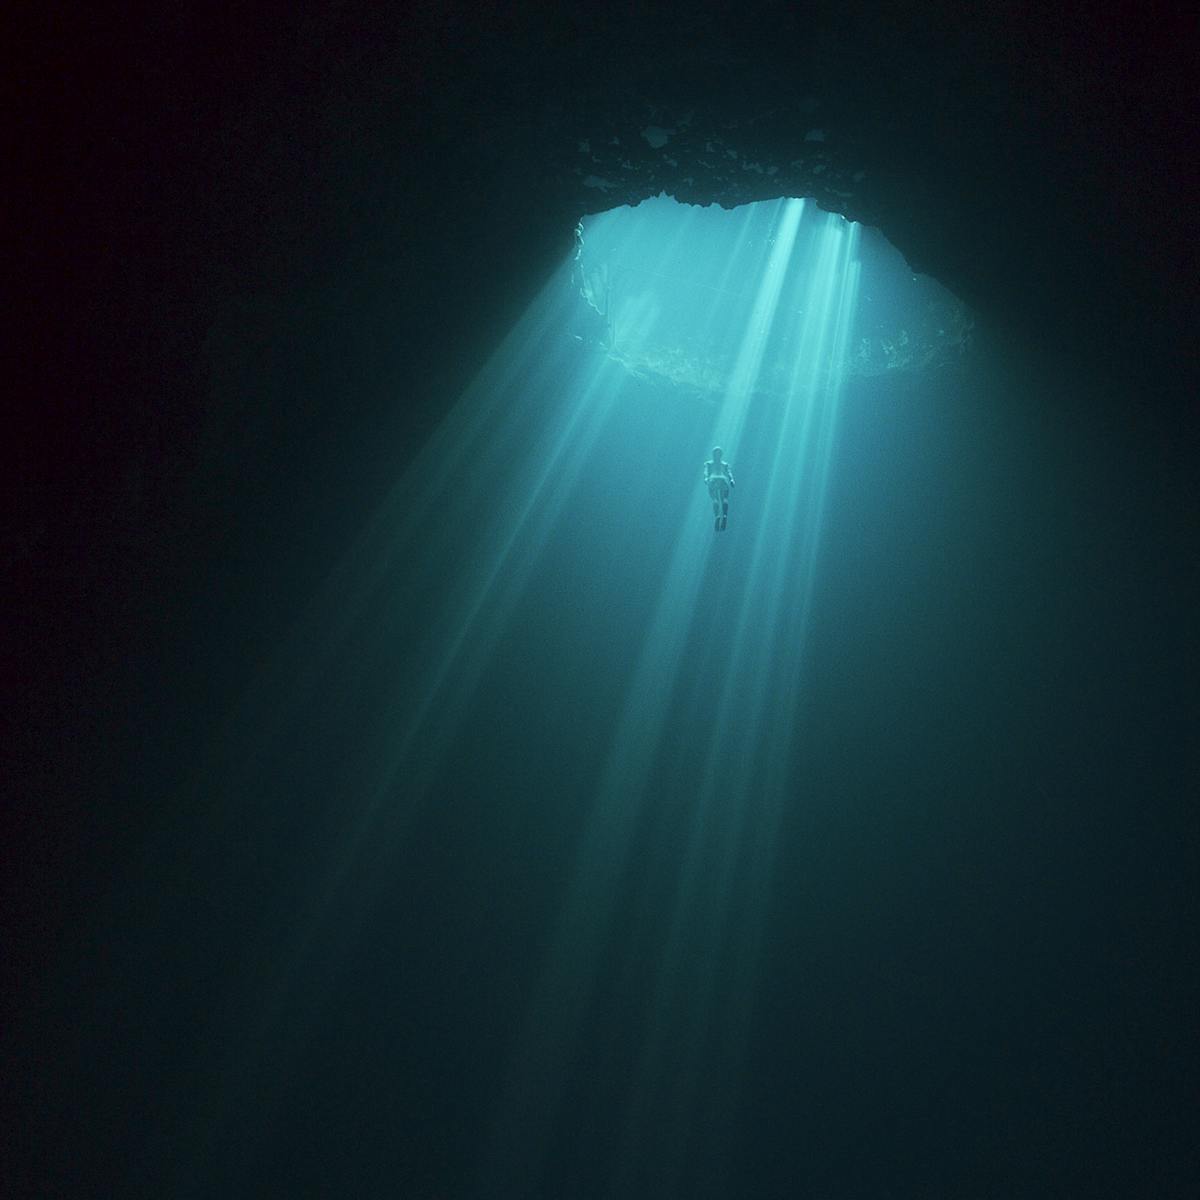 A diver appears lit by turquoise shafts of light in a darkened underwater shot.